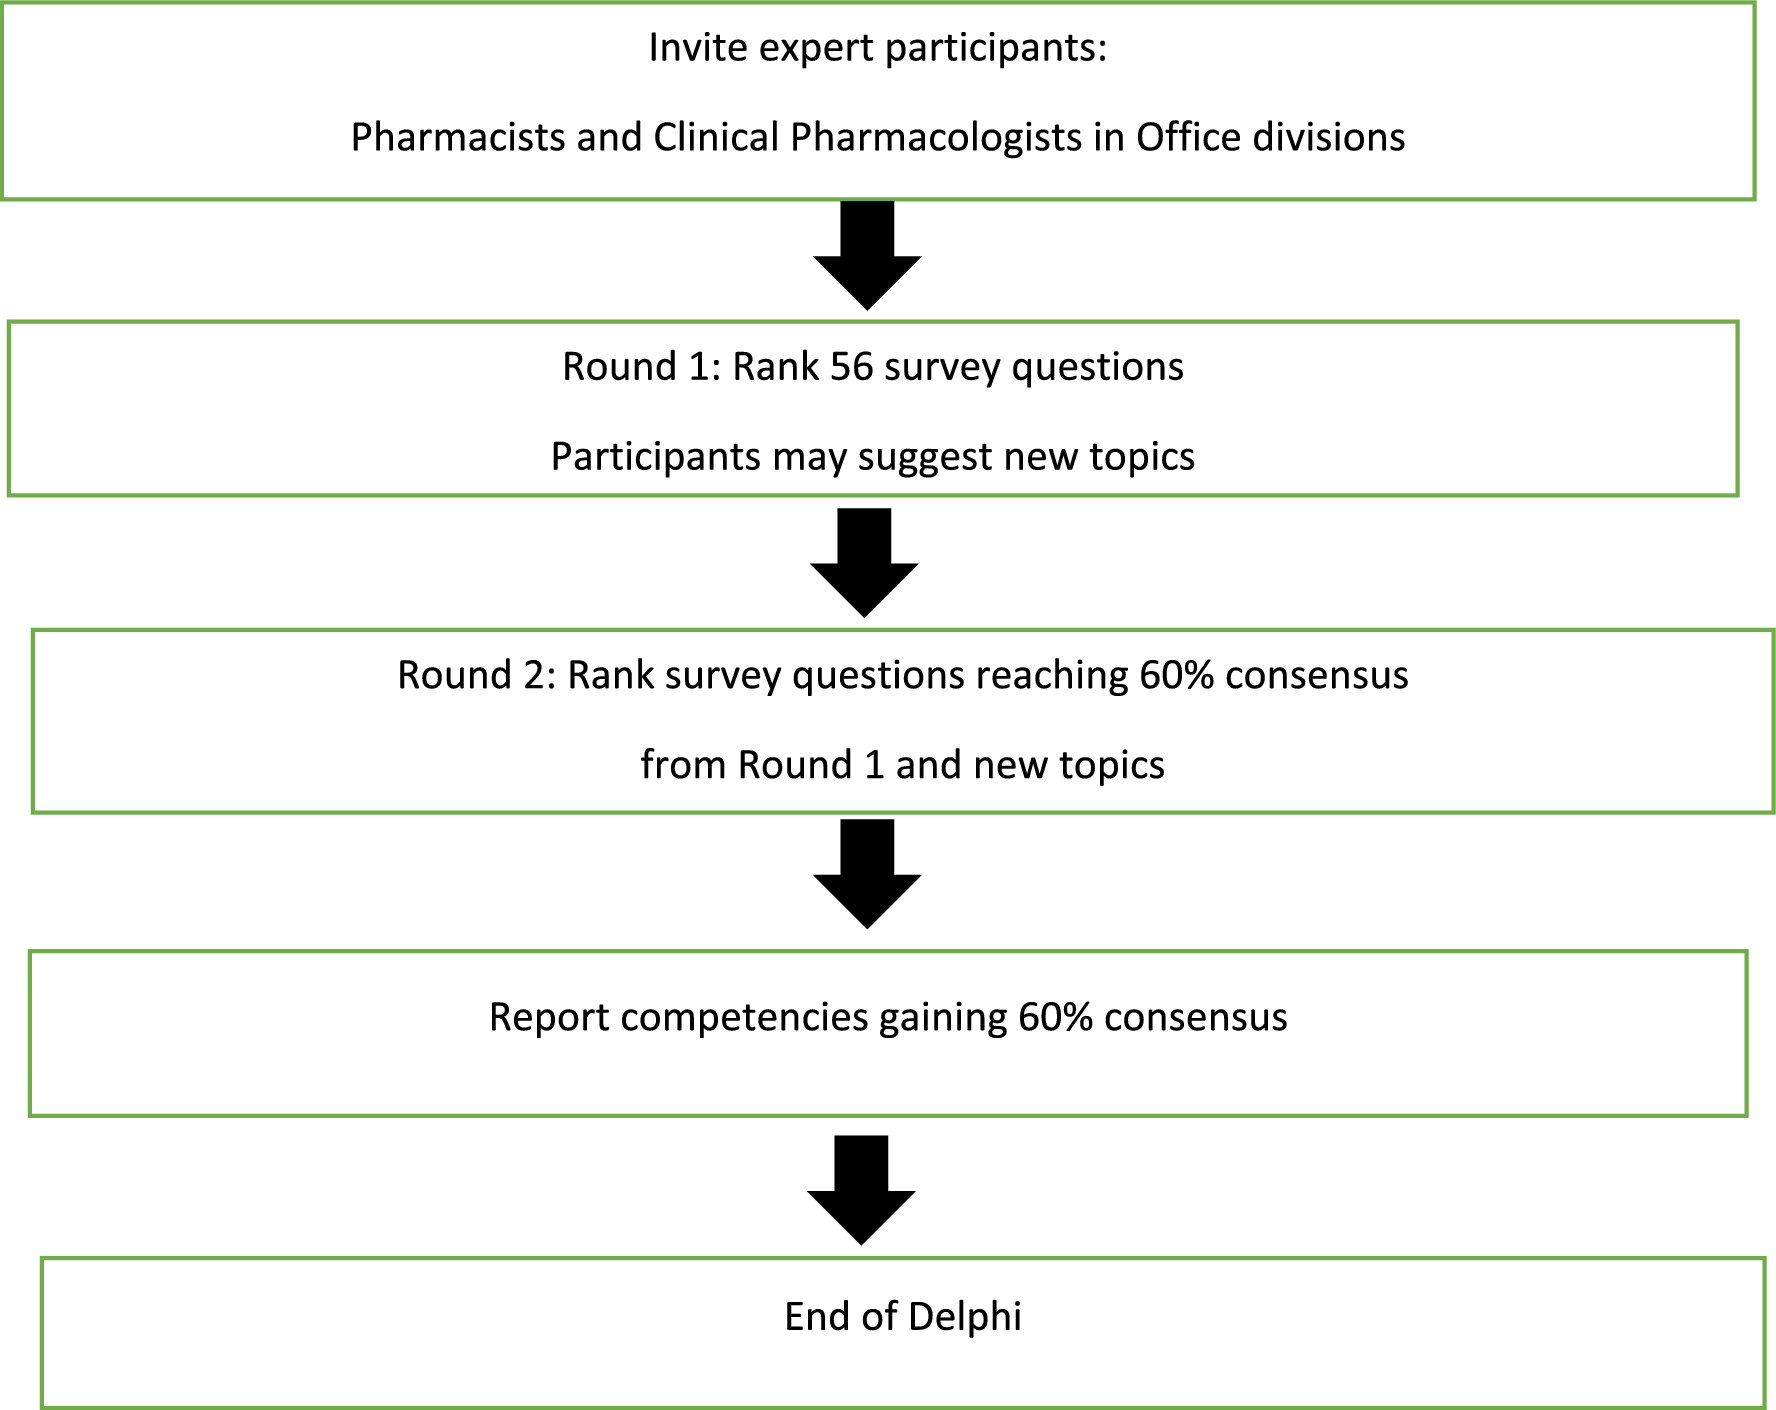 A Modified Delphi Study to Establish Essential Clinical Pharmacology Competencies